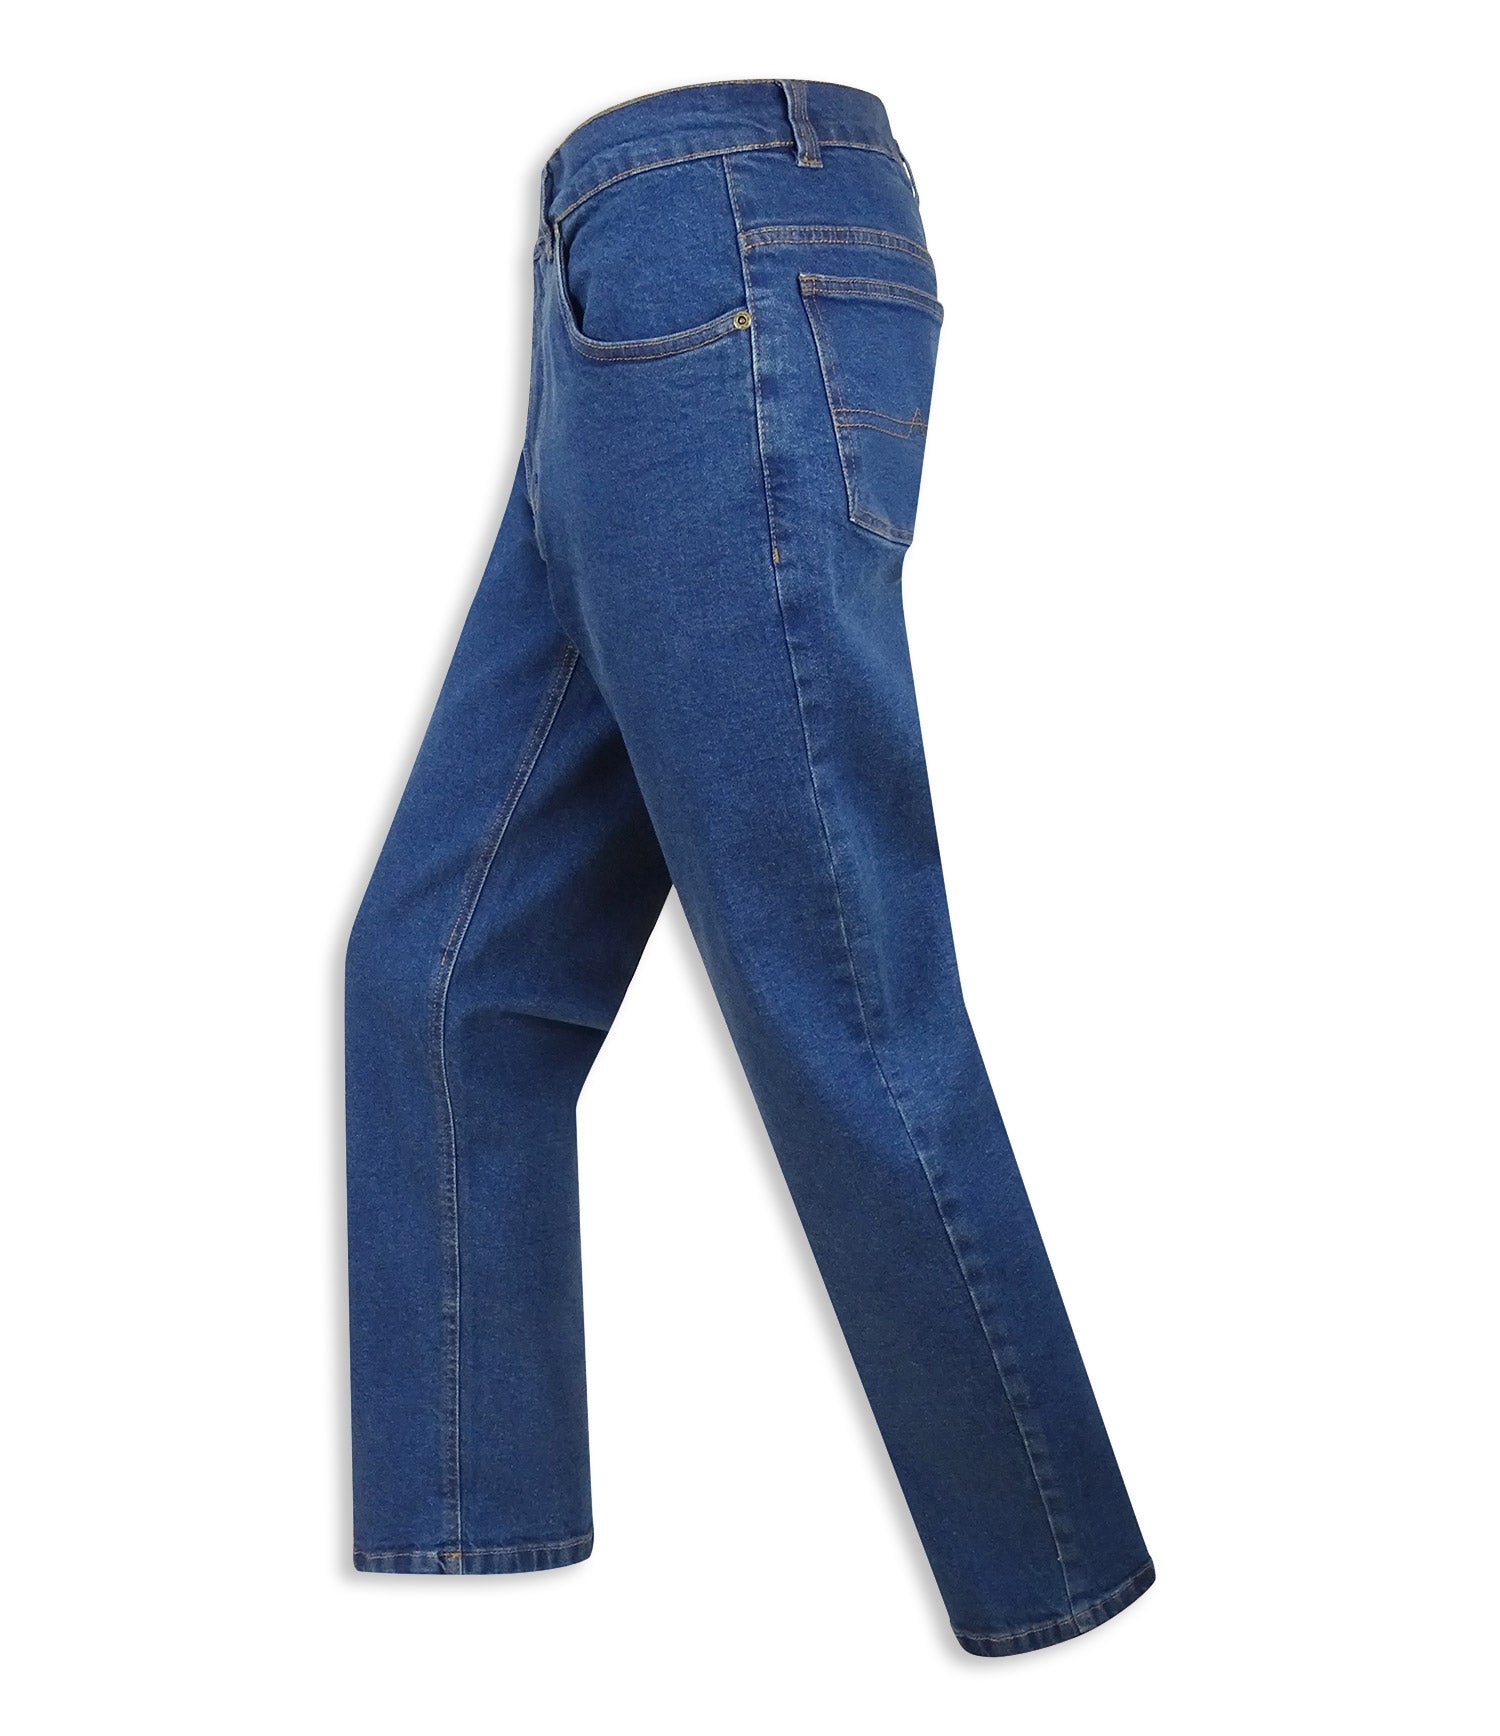 Stonewashed Hoggs of Fife Comfort Fit Heavyweight Jeans 